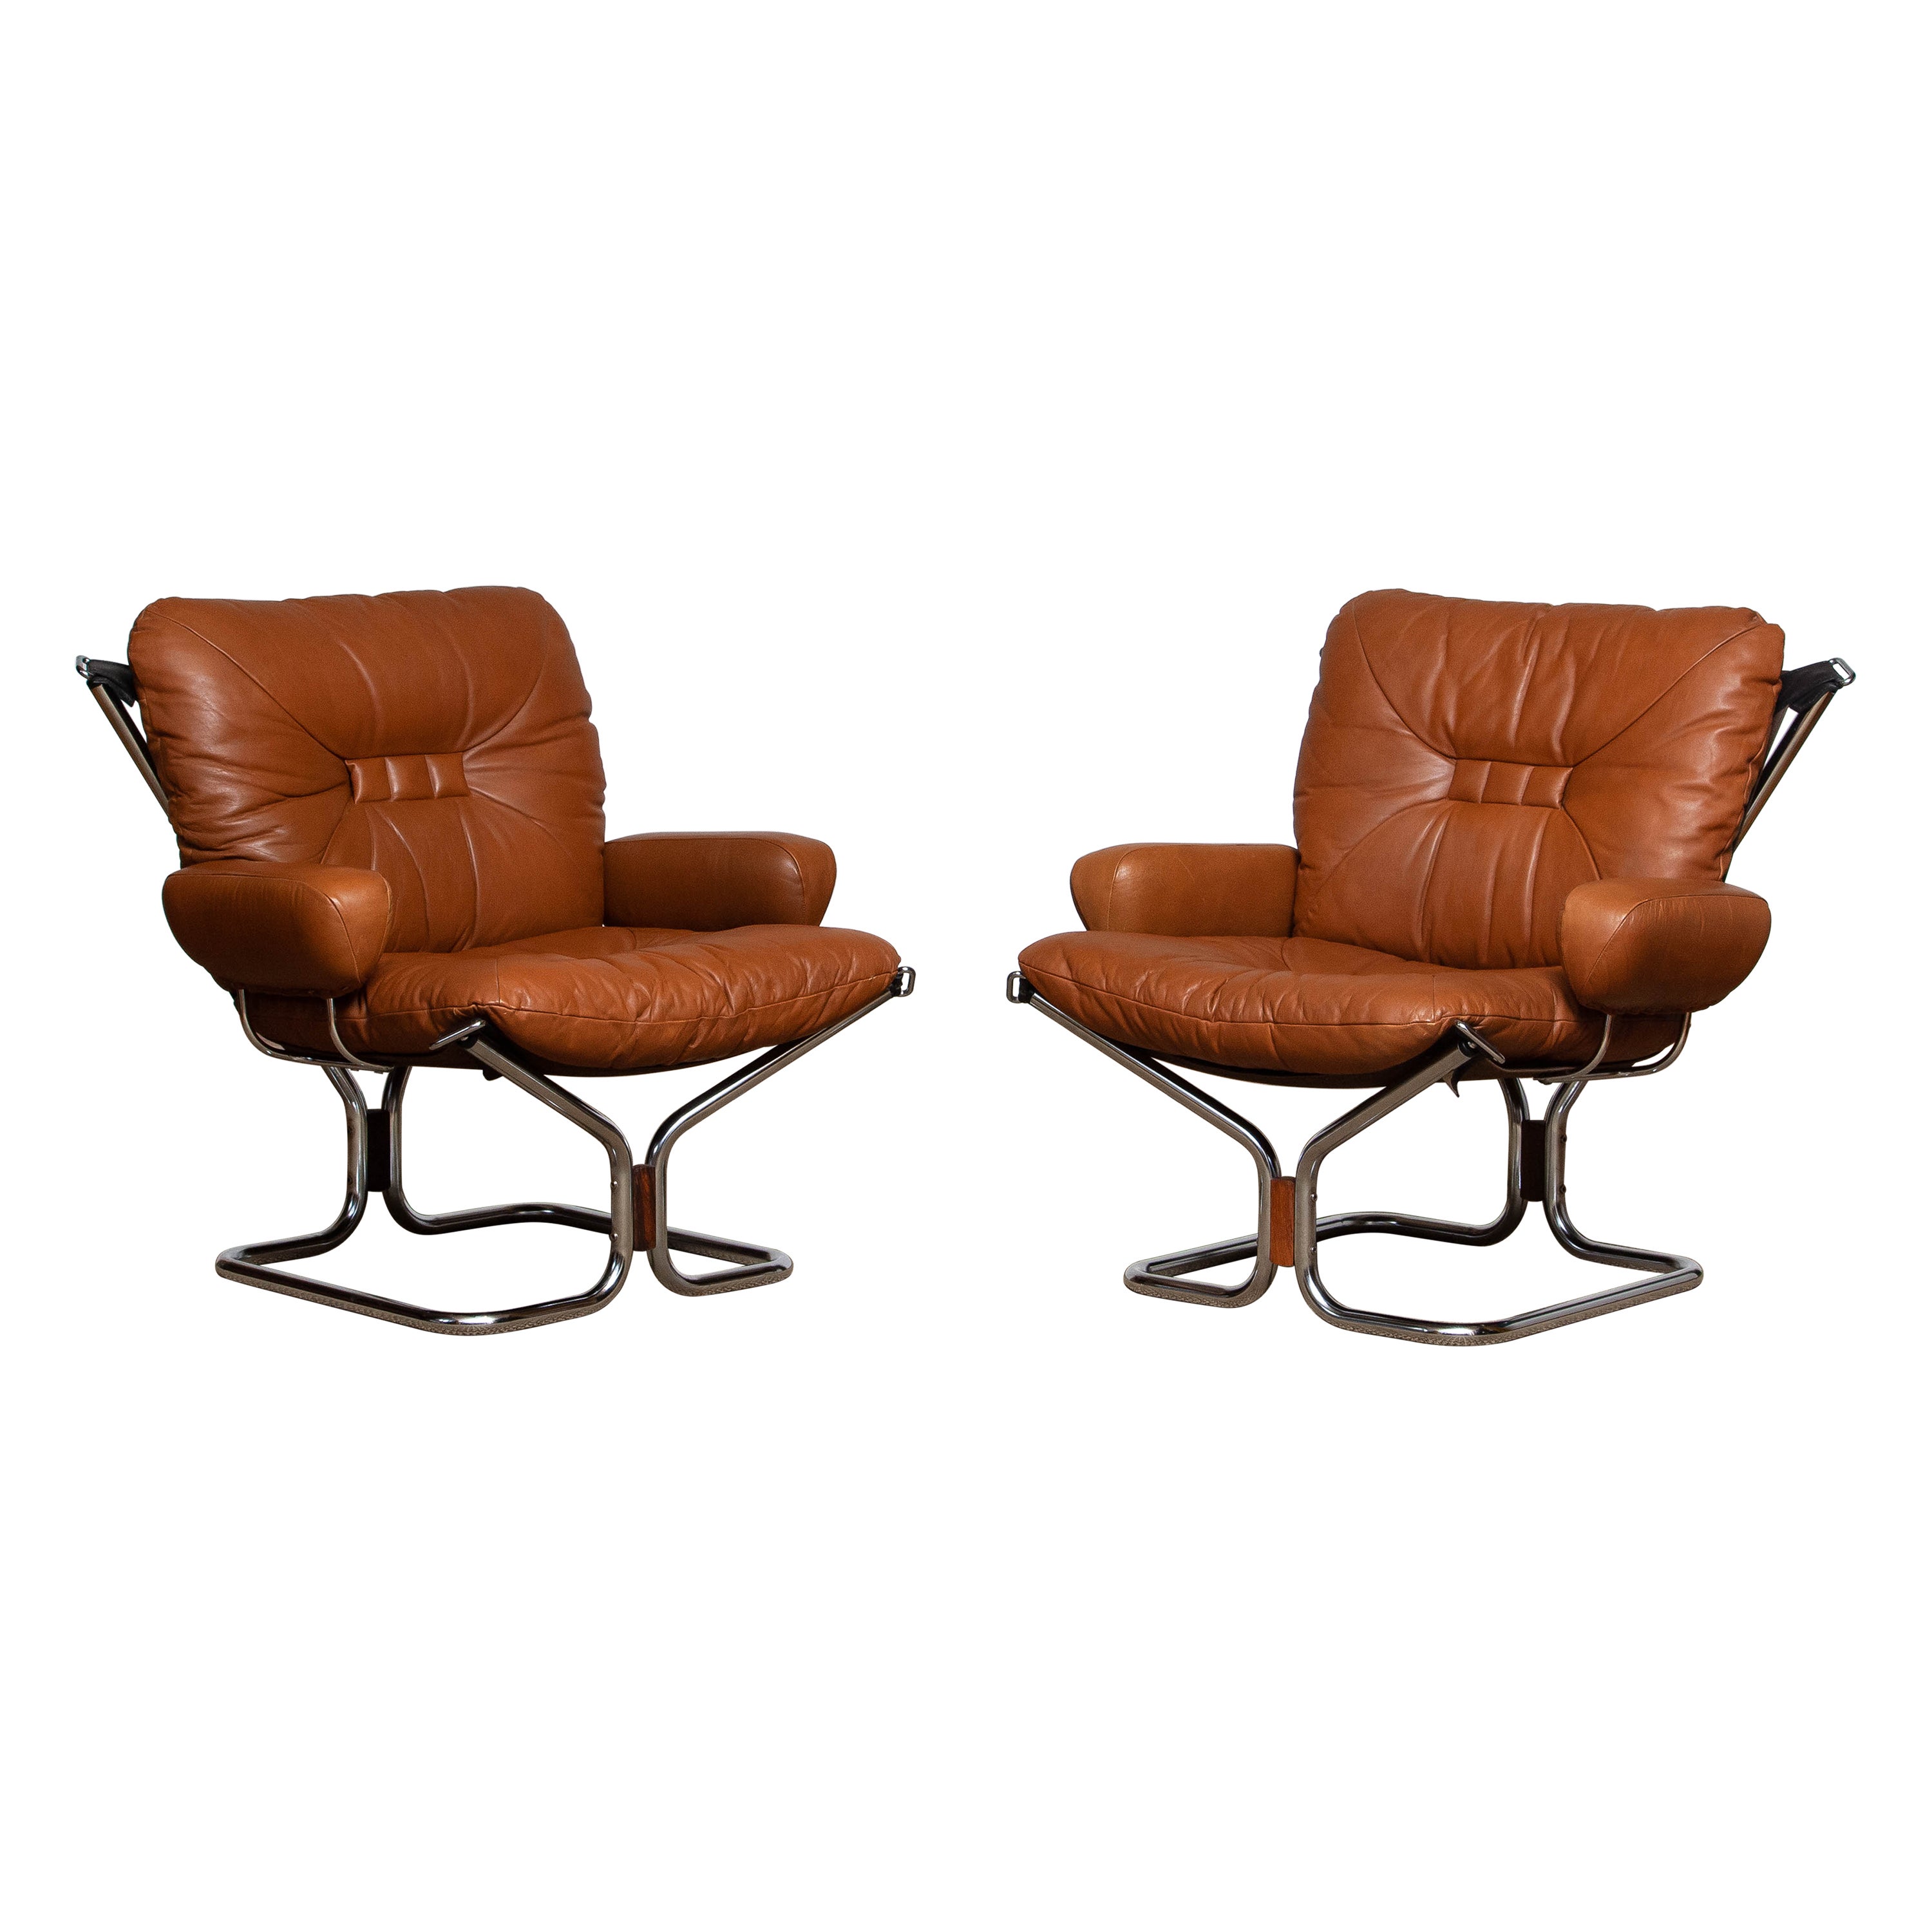 1970s Pair Lounge Chairs in Cognac Leather and Chrome by Harald Relling 